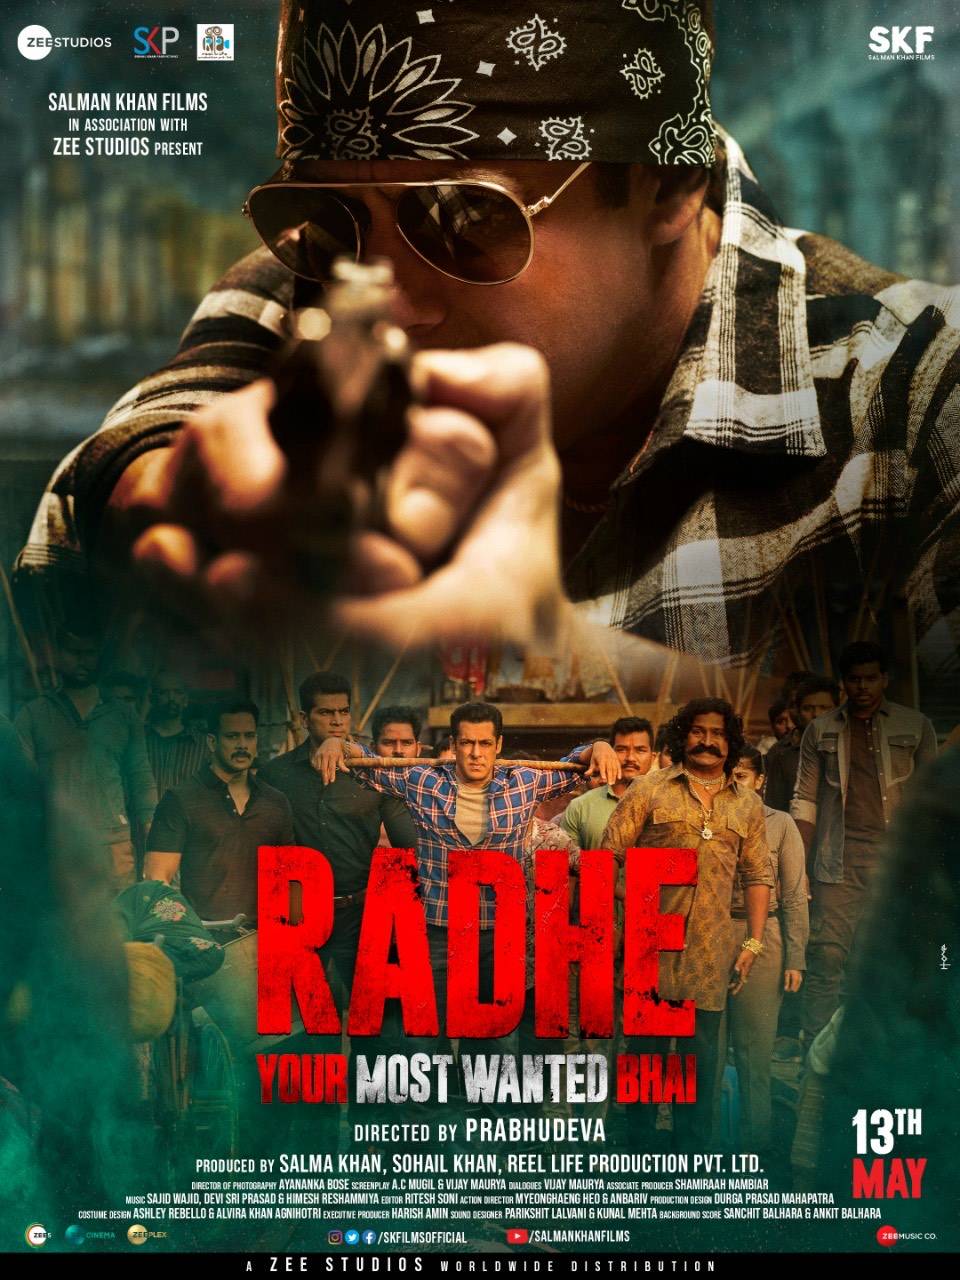 Salman Khan S Radhe Movie Poster Radhe Your Most Wanted Bhai Ahead Of Its Trailer Release The Makers Unveil A New Poster Of The Salman Khan Starrer